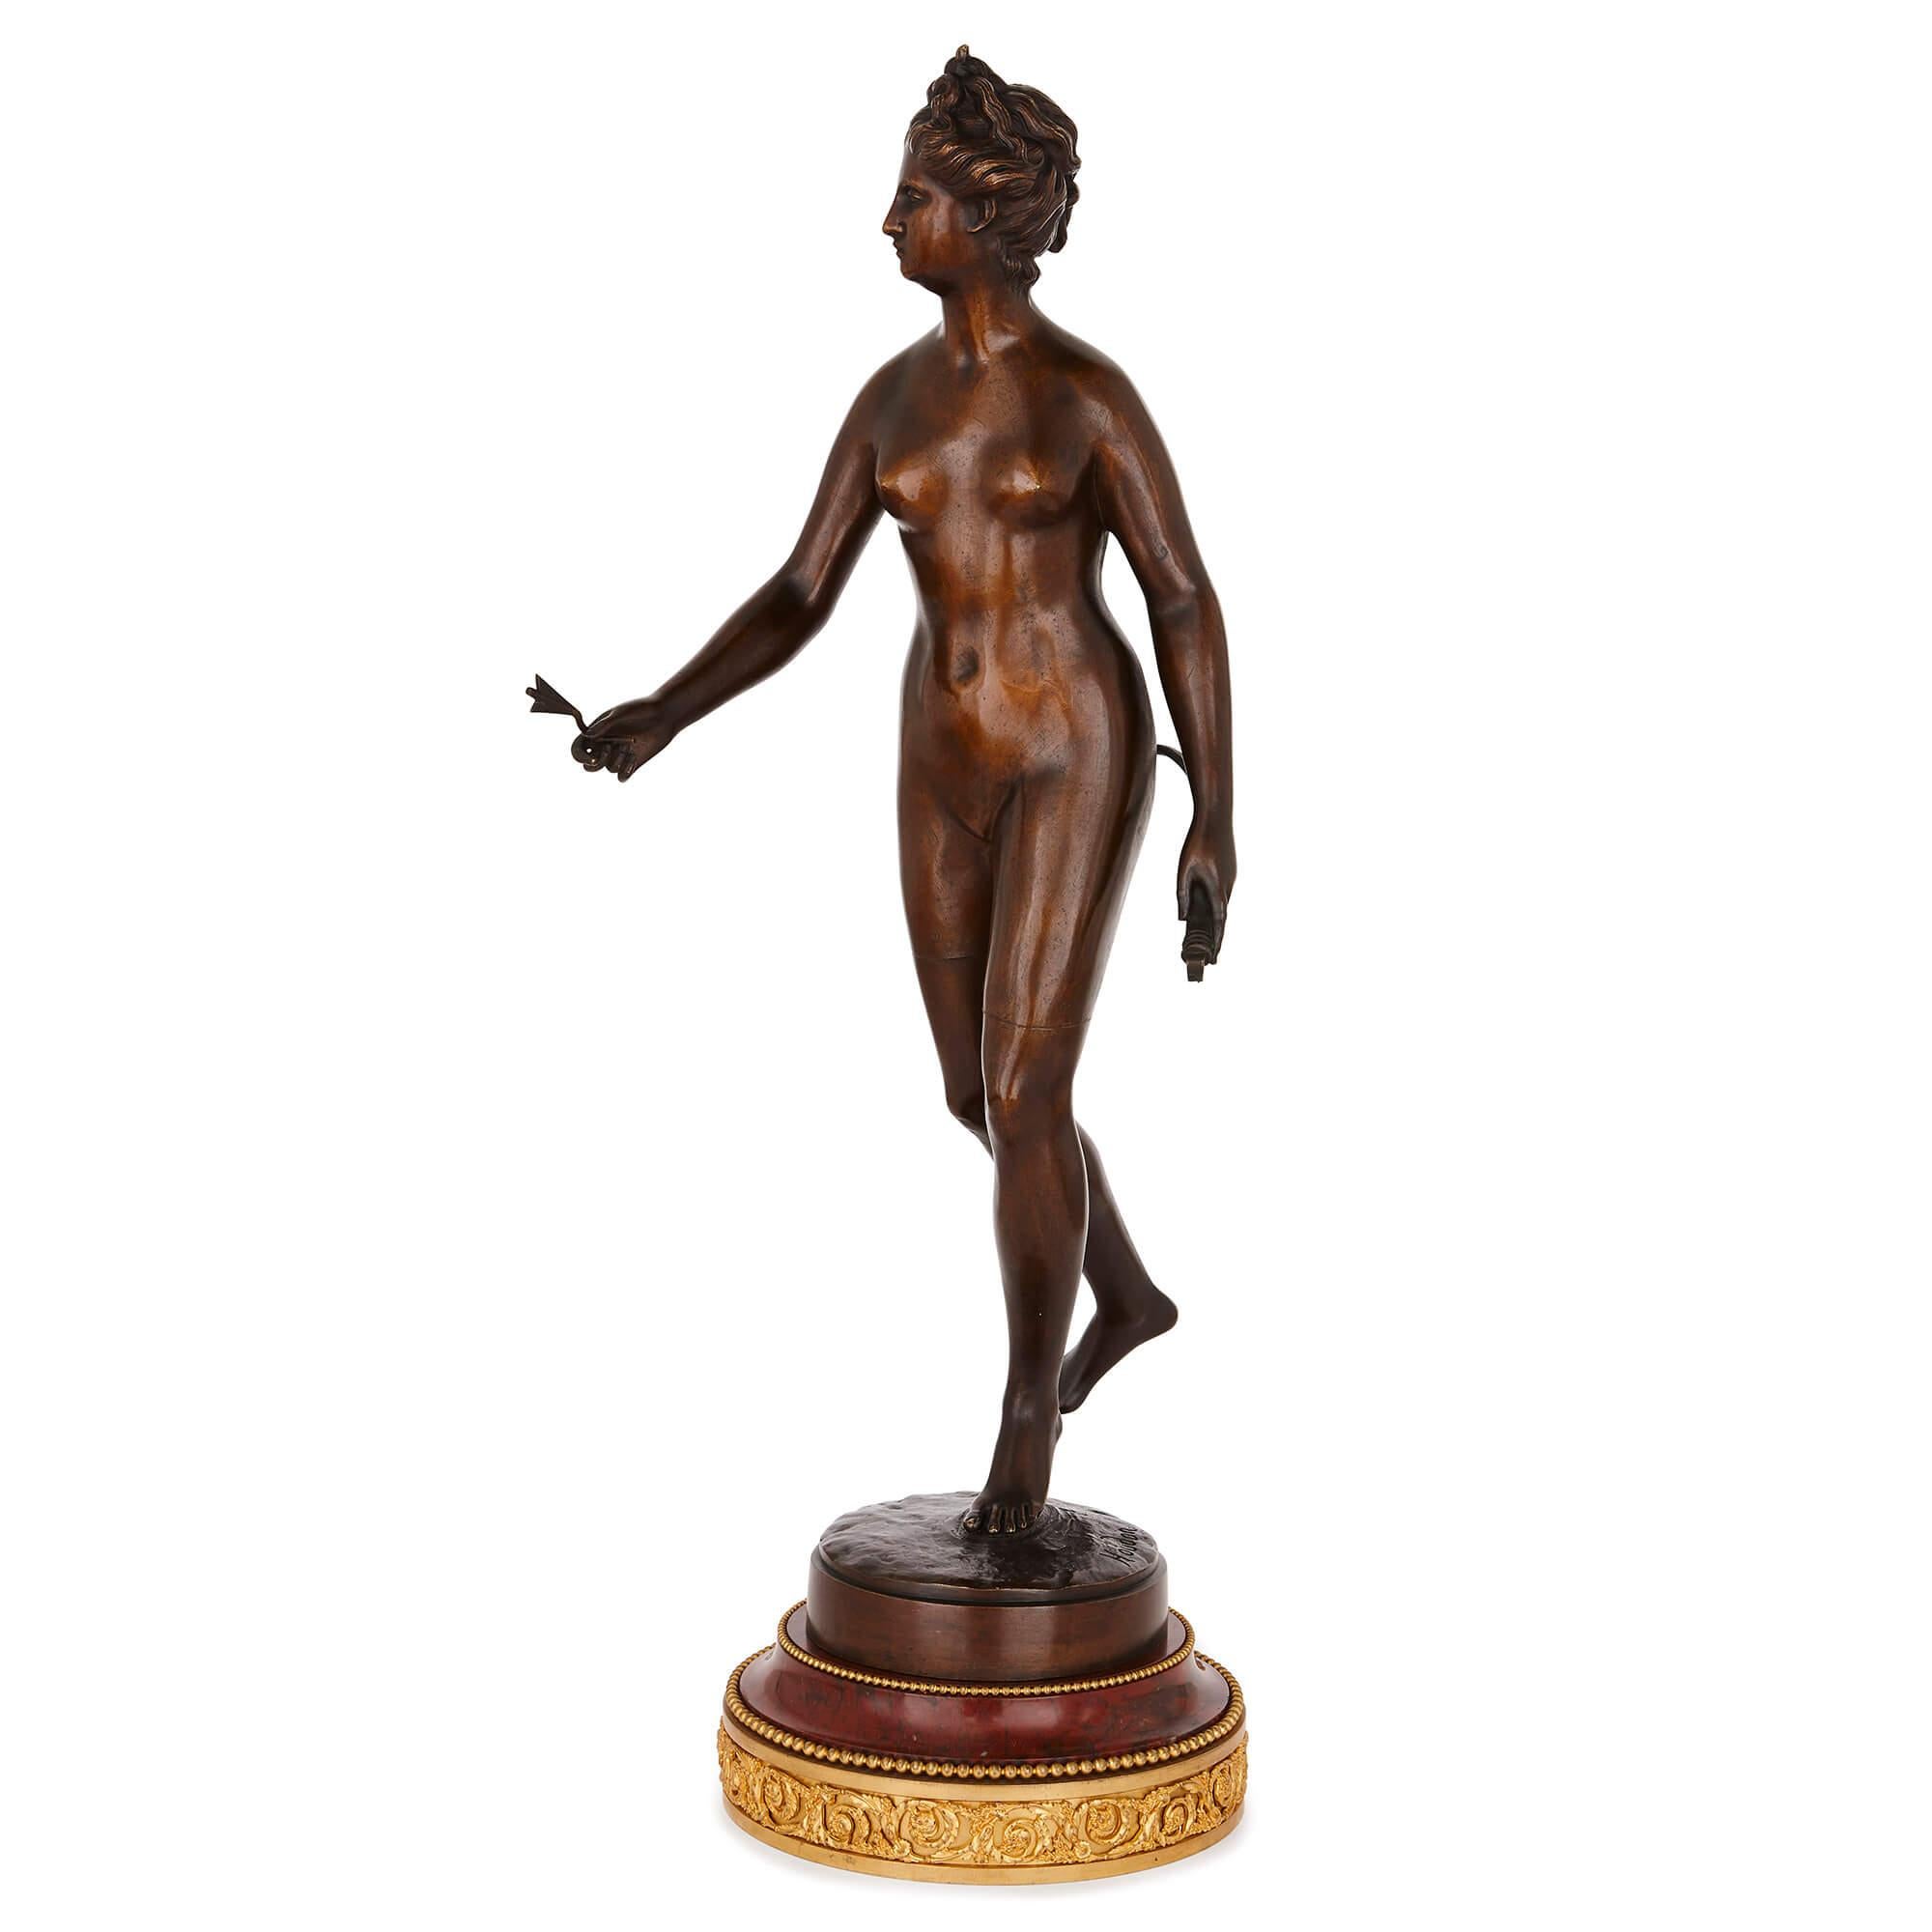 This beautiful patinated bronze figure is titled 'Diana Chasseresse', or 'Diana Huntress', and depicts the Roman goddess Diana, goddess of hunting. It replicates an important work of French Neoclassicism in the late 18th Century, by Jean-Antoine